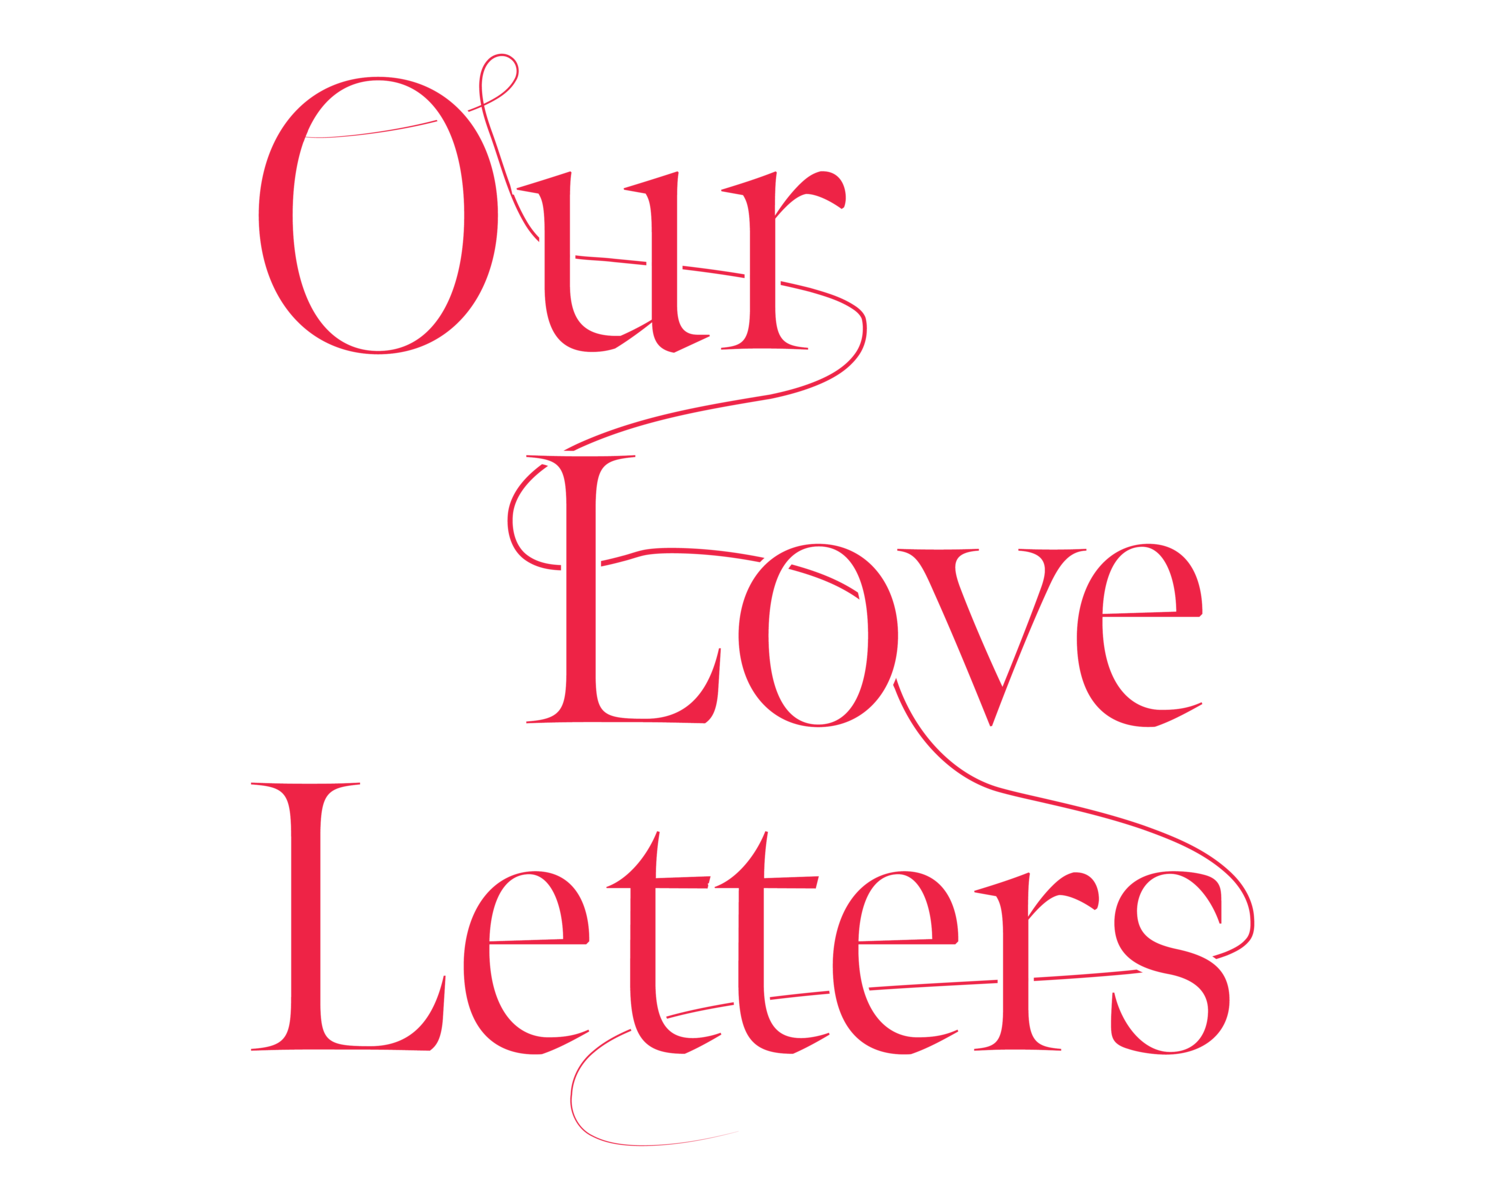 Our Love Letters